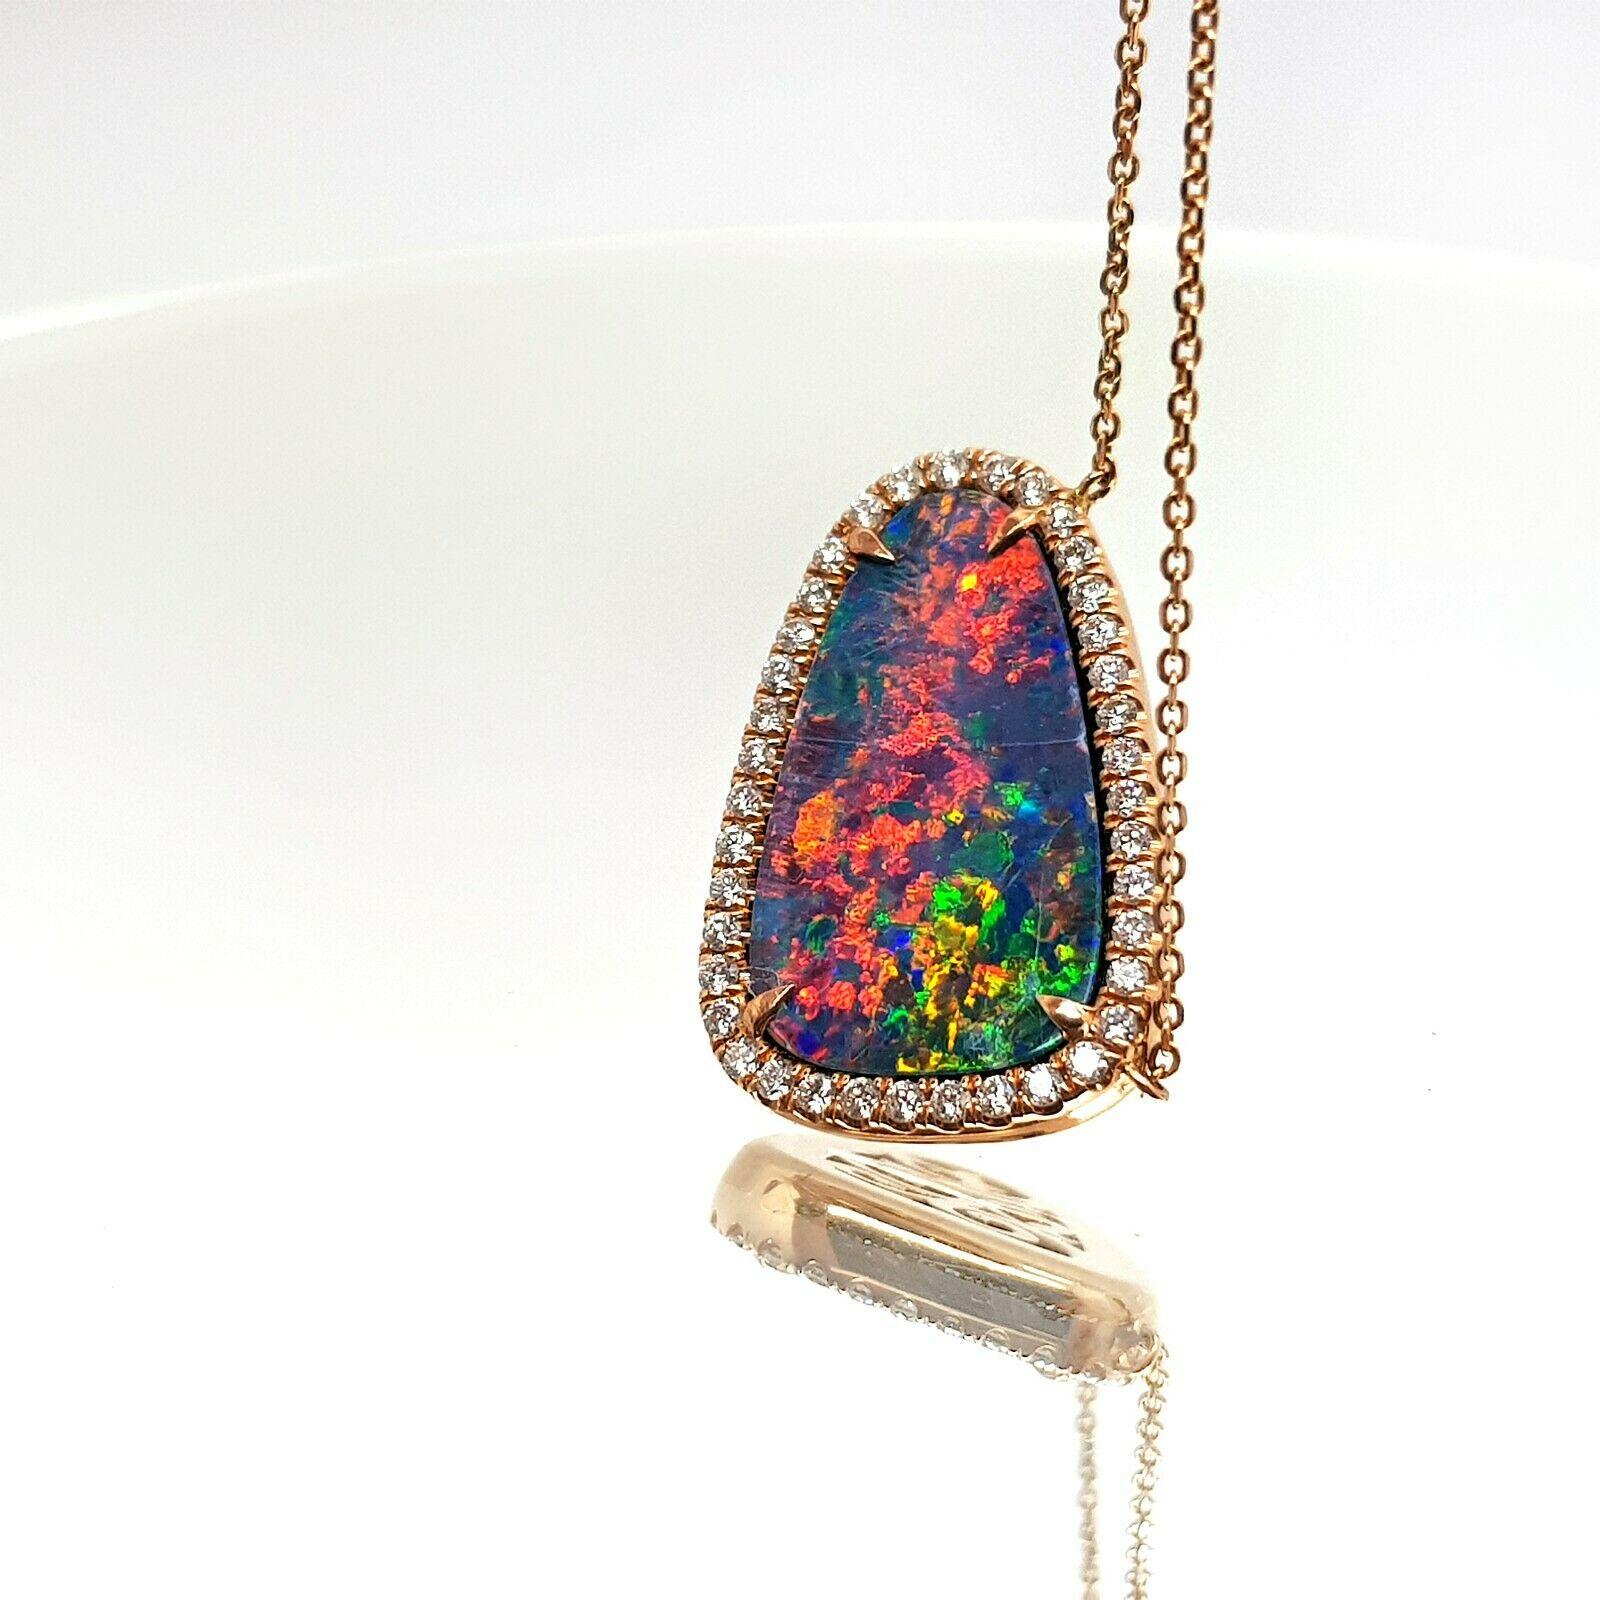  Specifications:
    main stone: OPAL DUBLET  21.7 x 14mm
    additional: DIAMONDS
    diamonds: 39 PCS
    carat total weight: 0.53
    color: G
    clarity: SI1
    brand: custom
    metal: 14k rose gold
    type: PENDANT
    weight: 10.01 GR
   